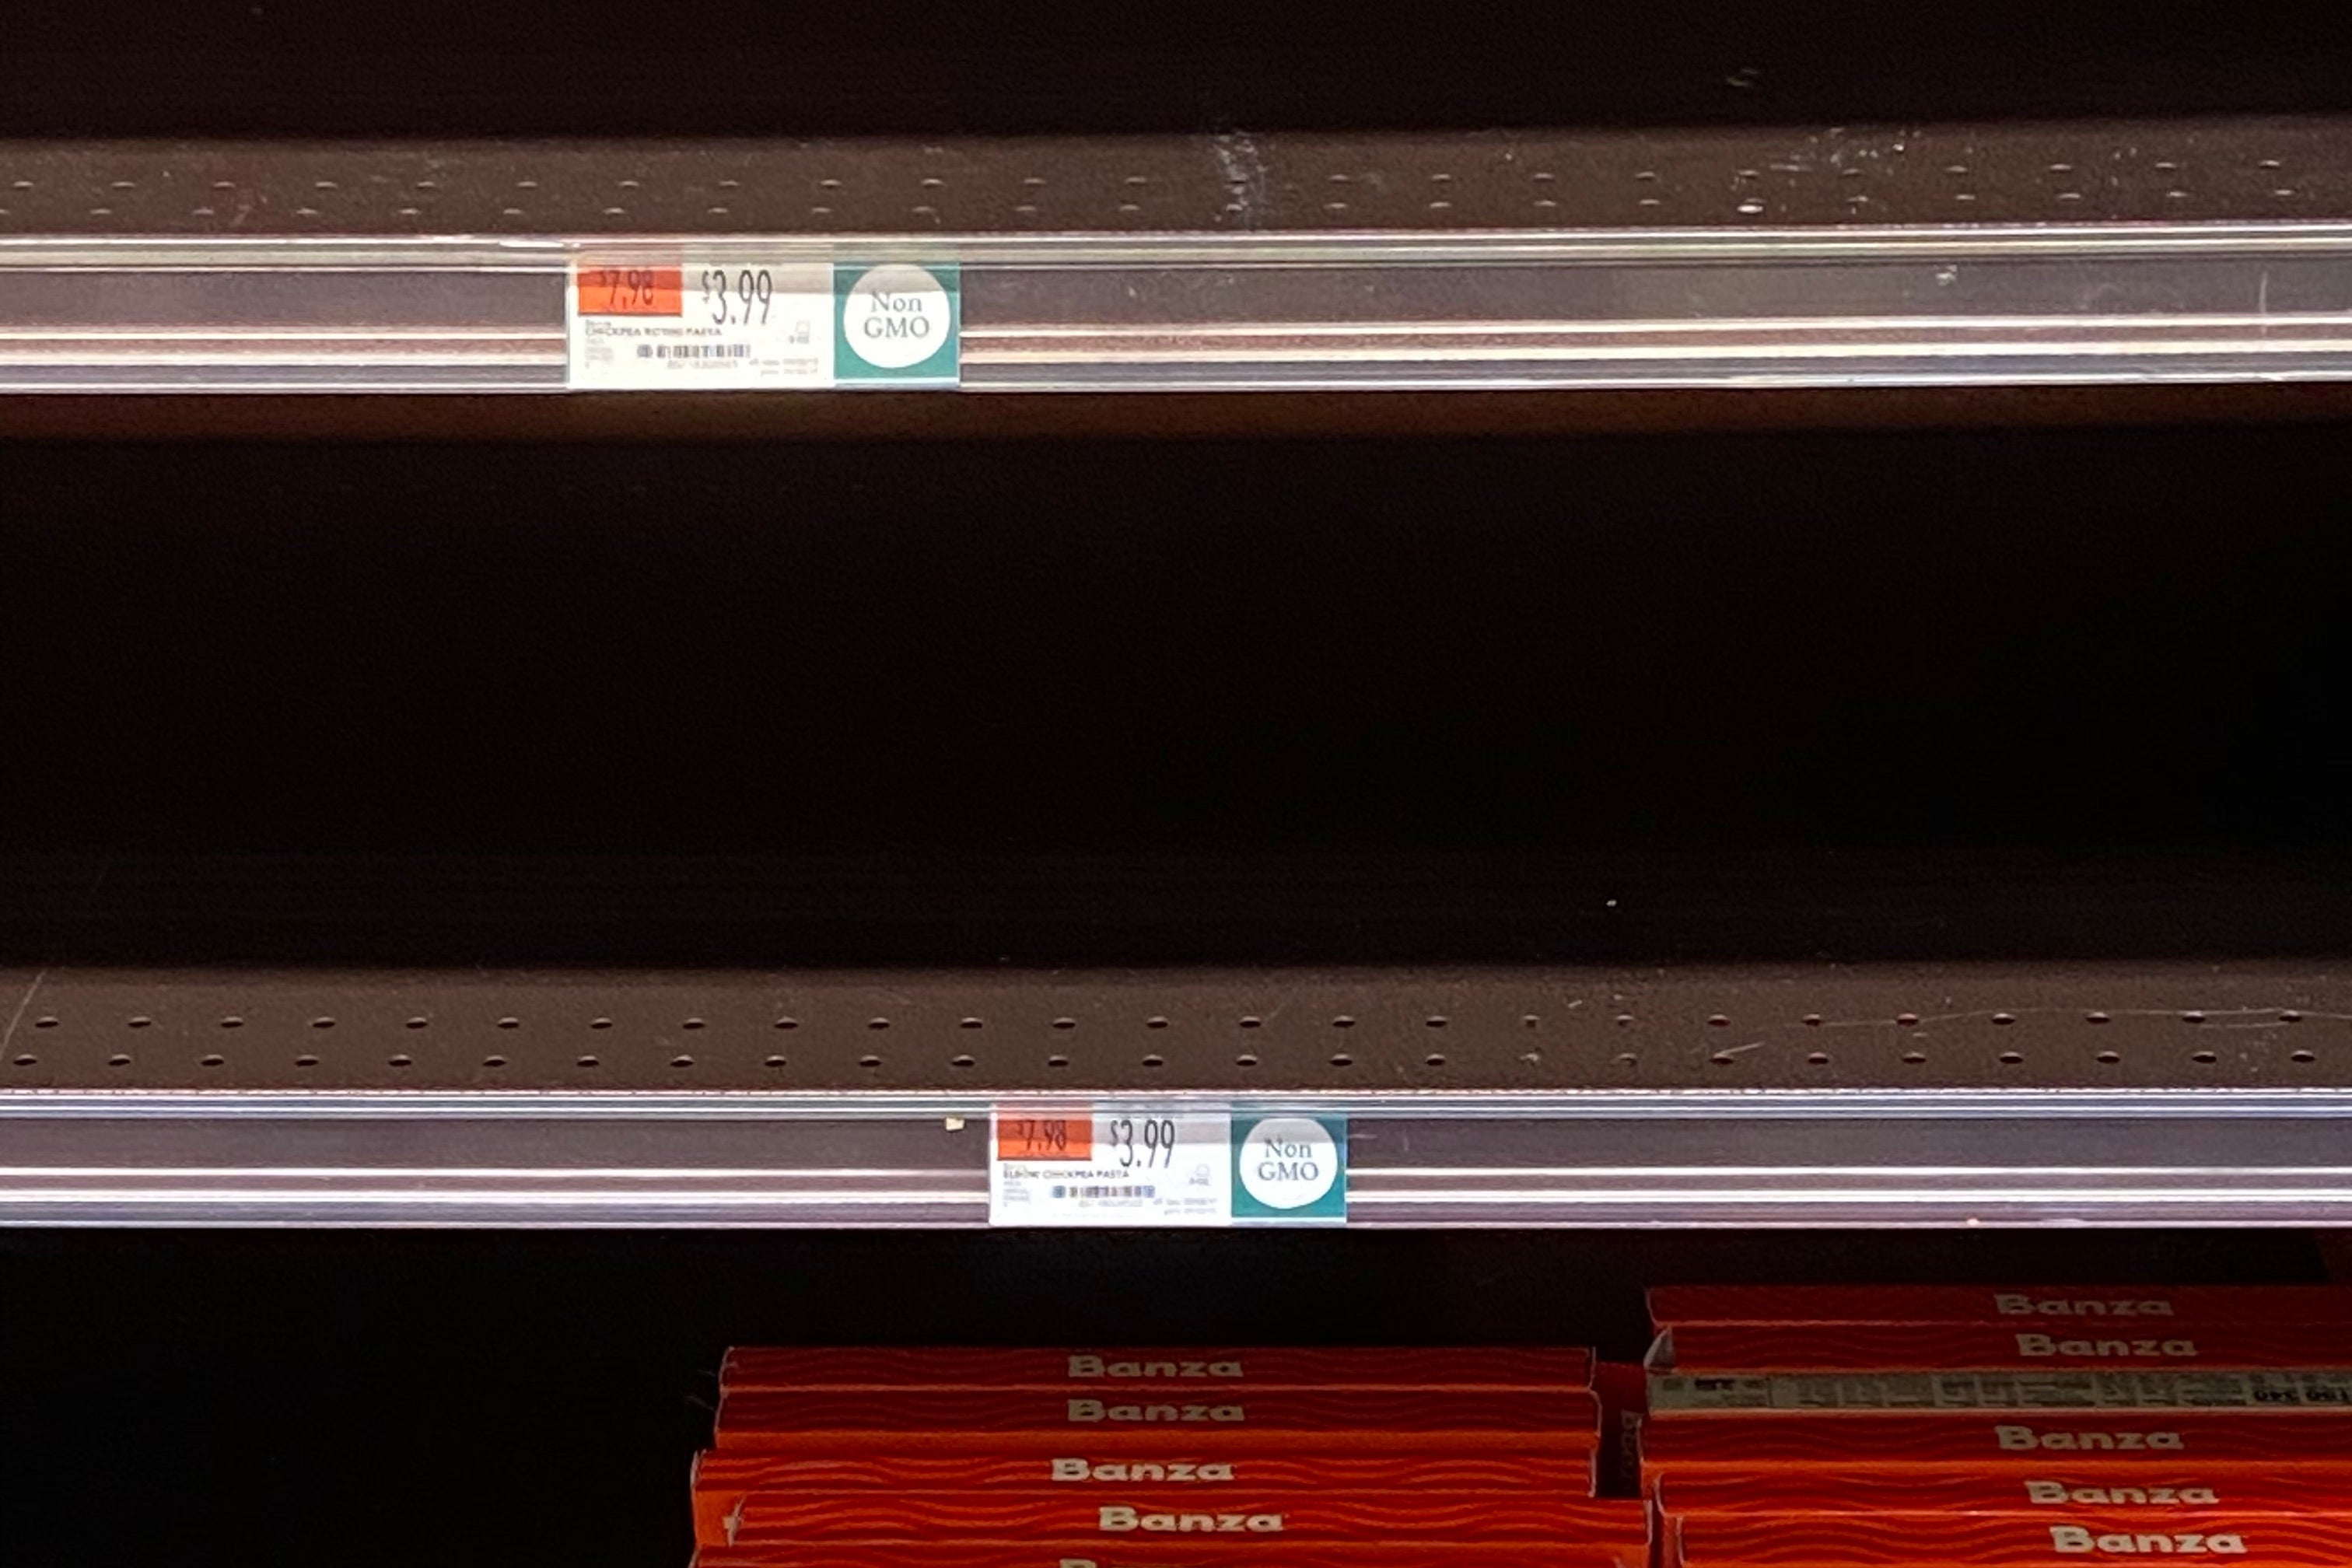 Banza pasta boxes on an otherwise empty shelf.